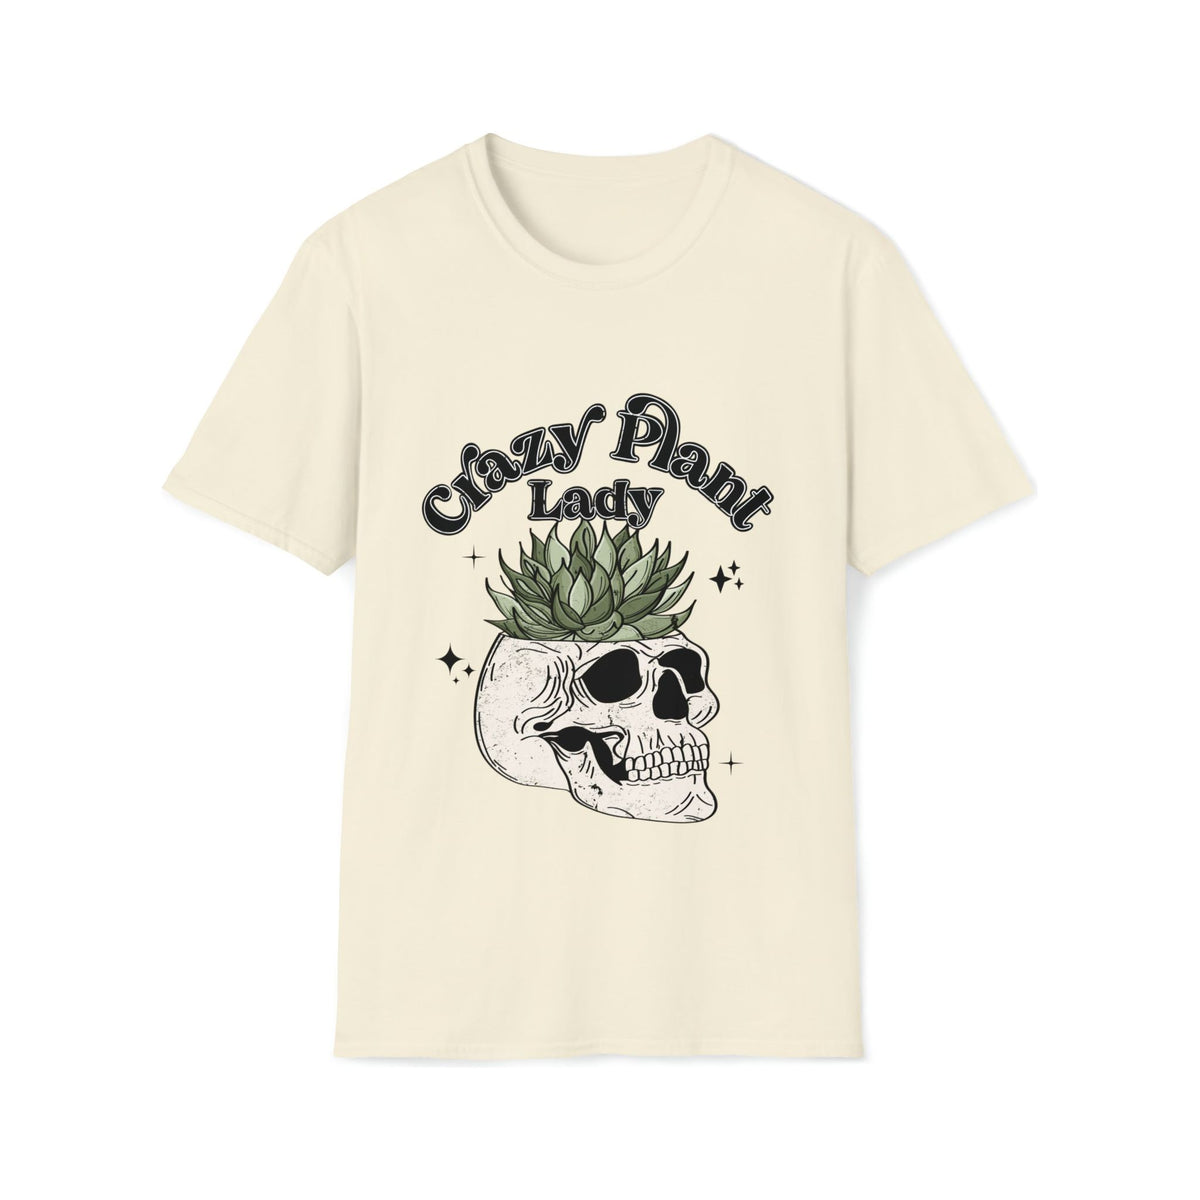 Crazy Plant Lady Soft style Tee